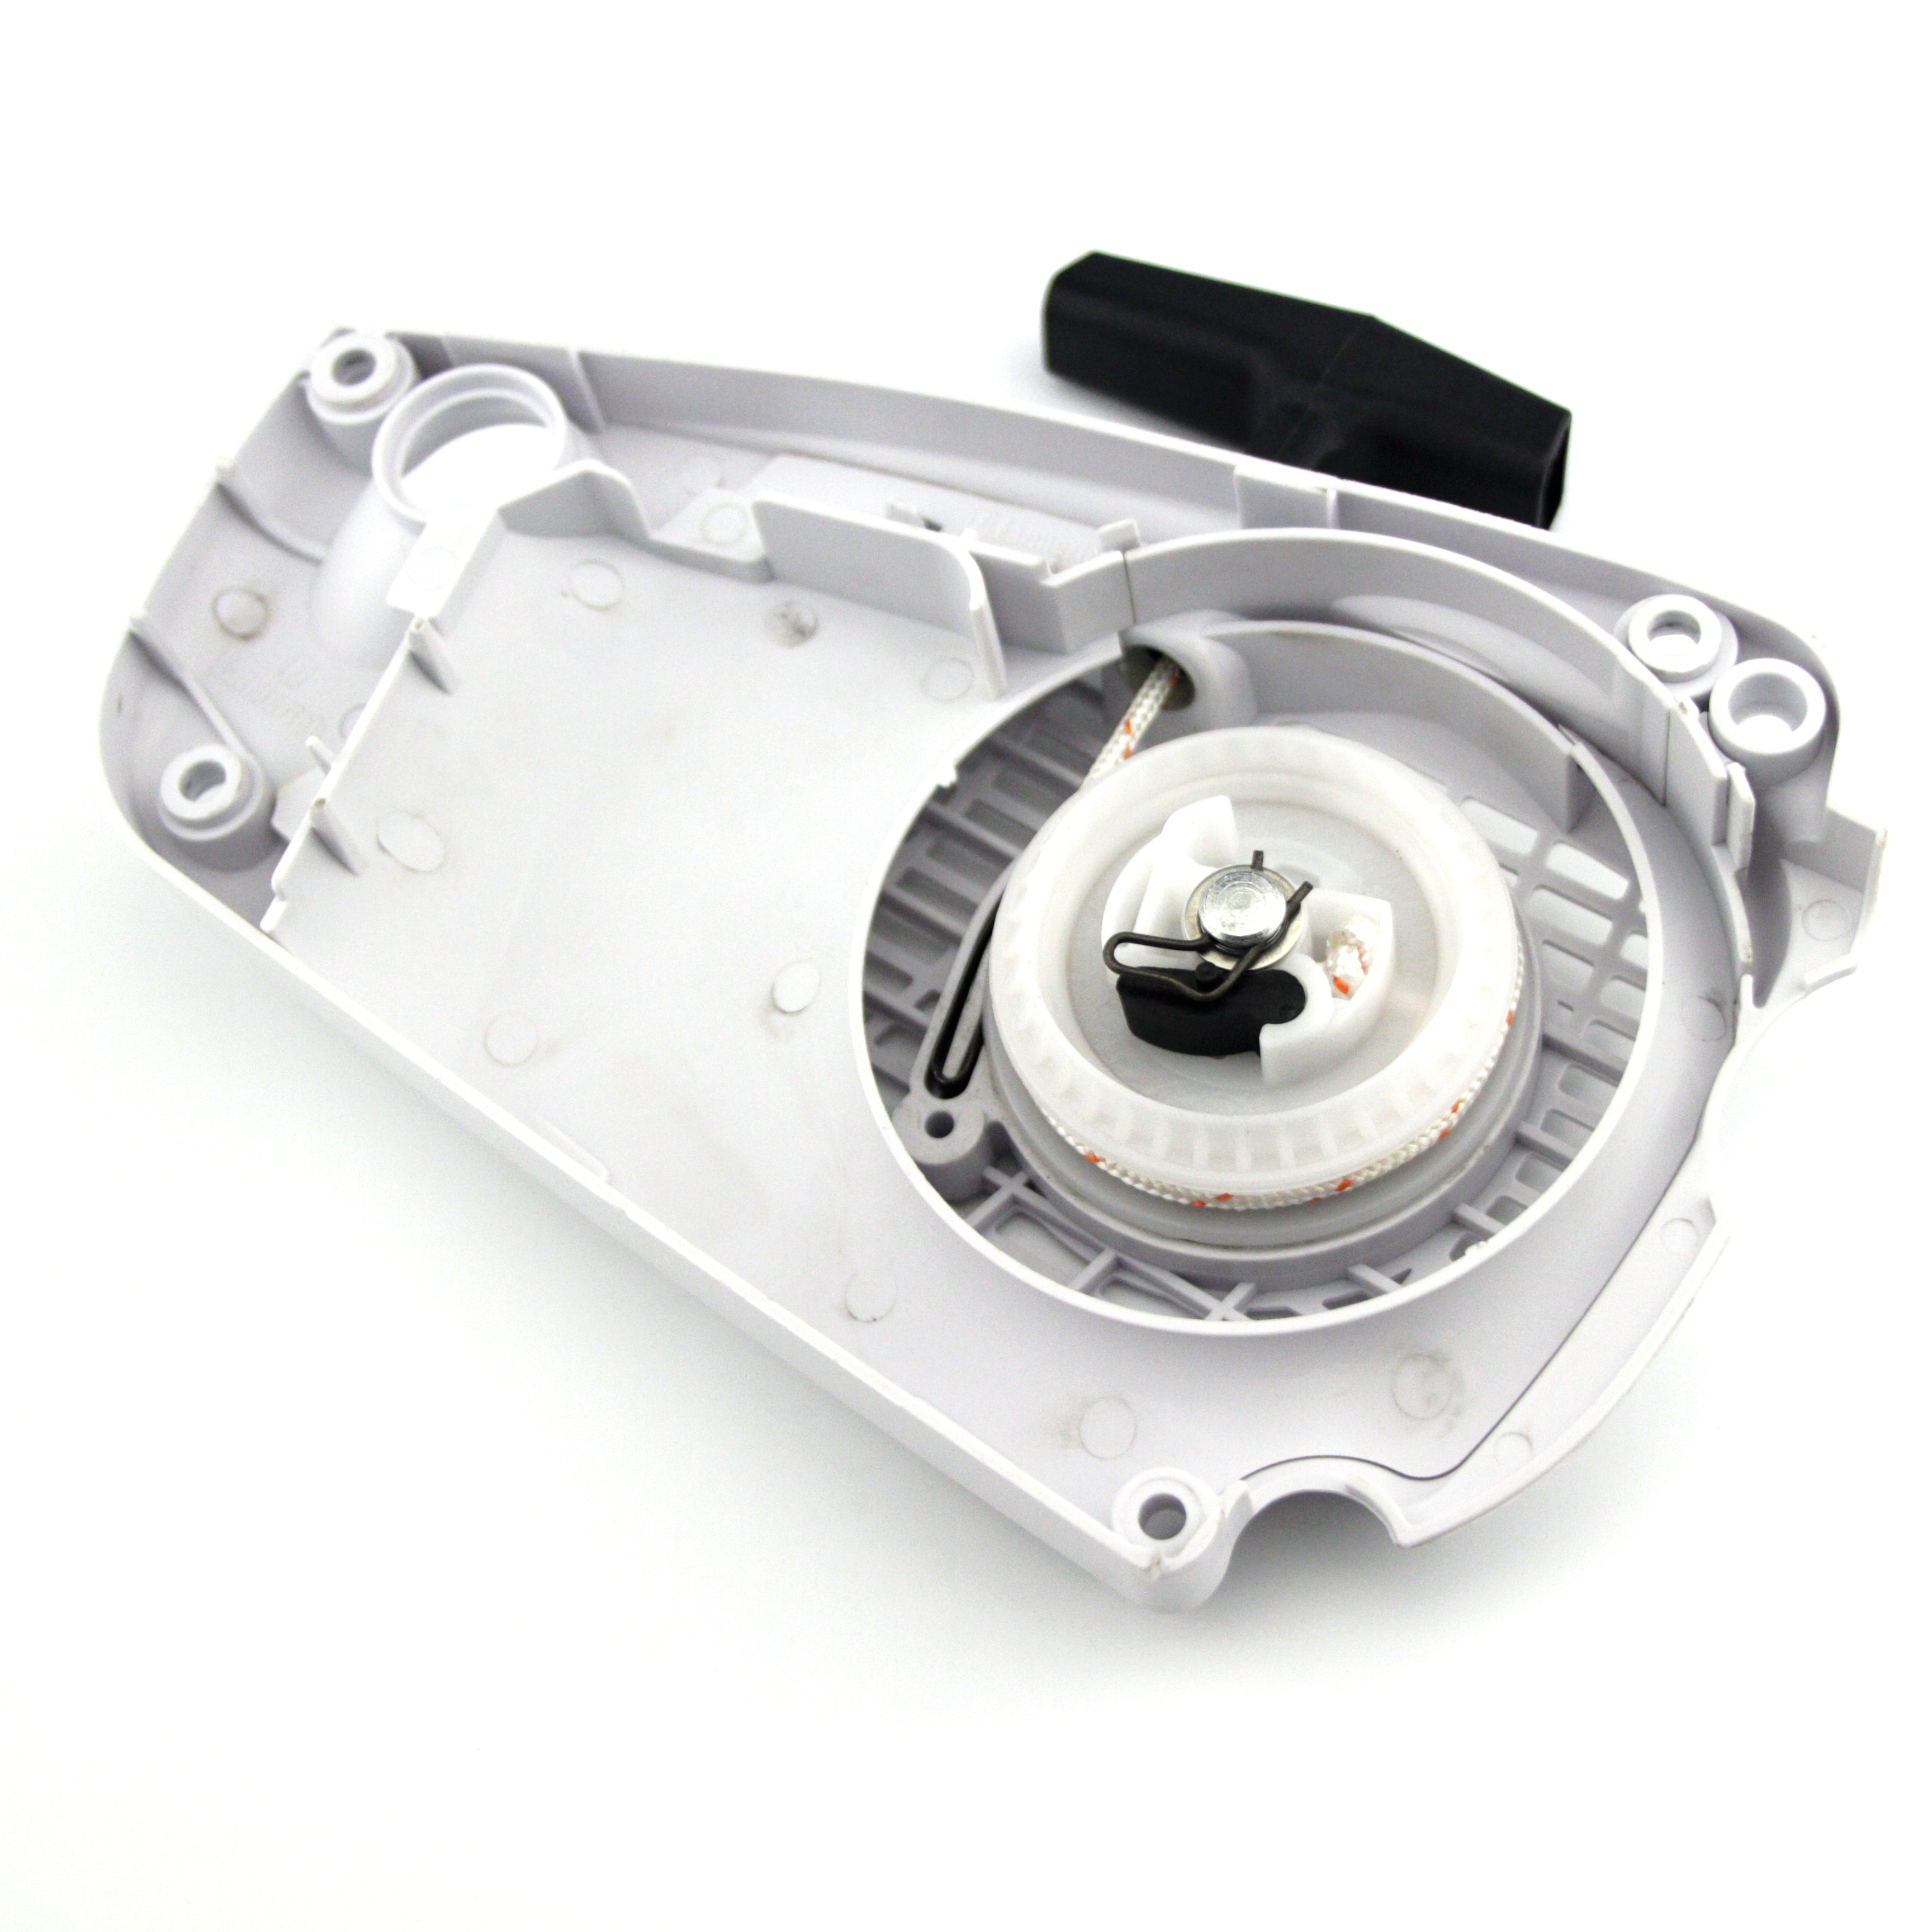 Recoil Starter Assy. For Stihl MS192T MS193T Chainsaw Pull Rewind Start OEM# 1137 080 2100, 1137 080 1800